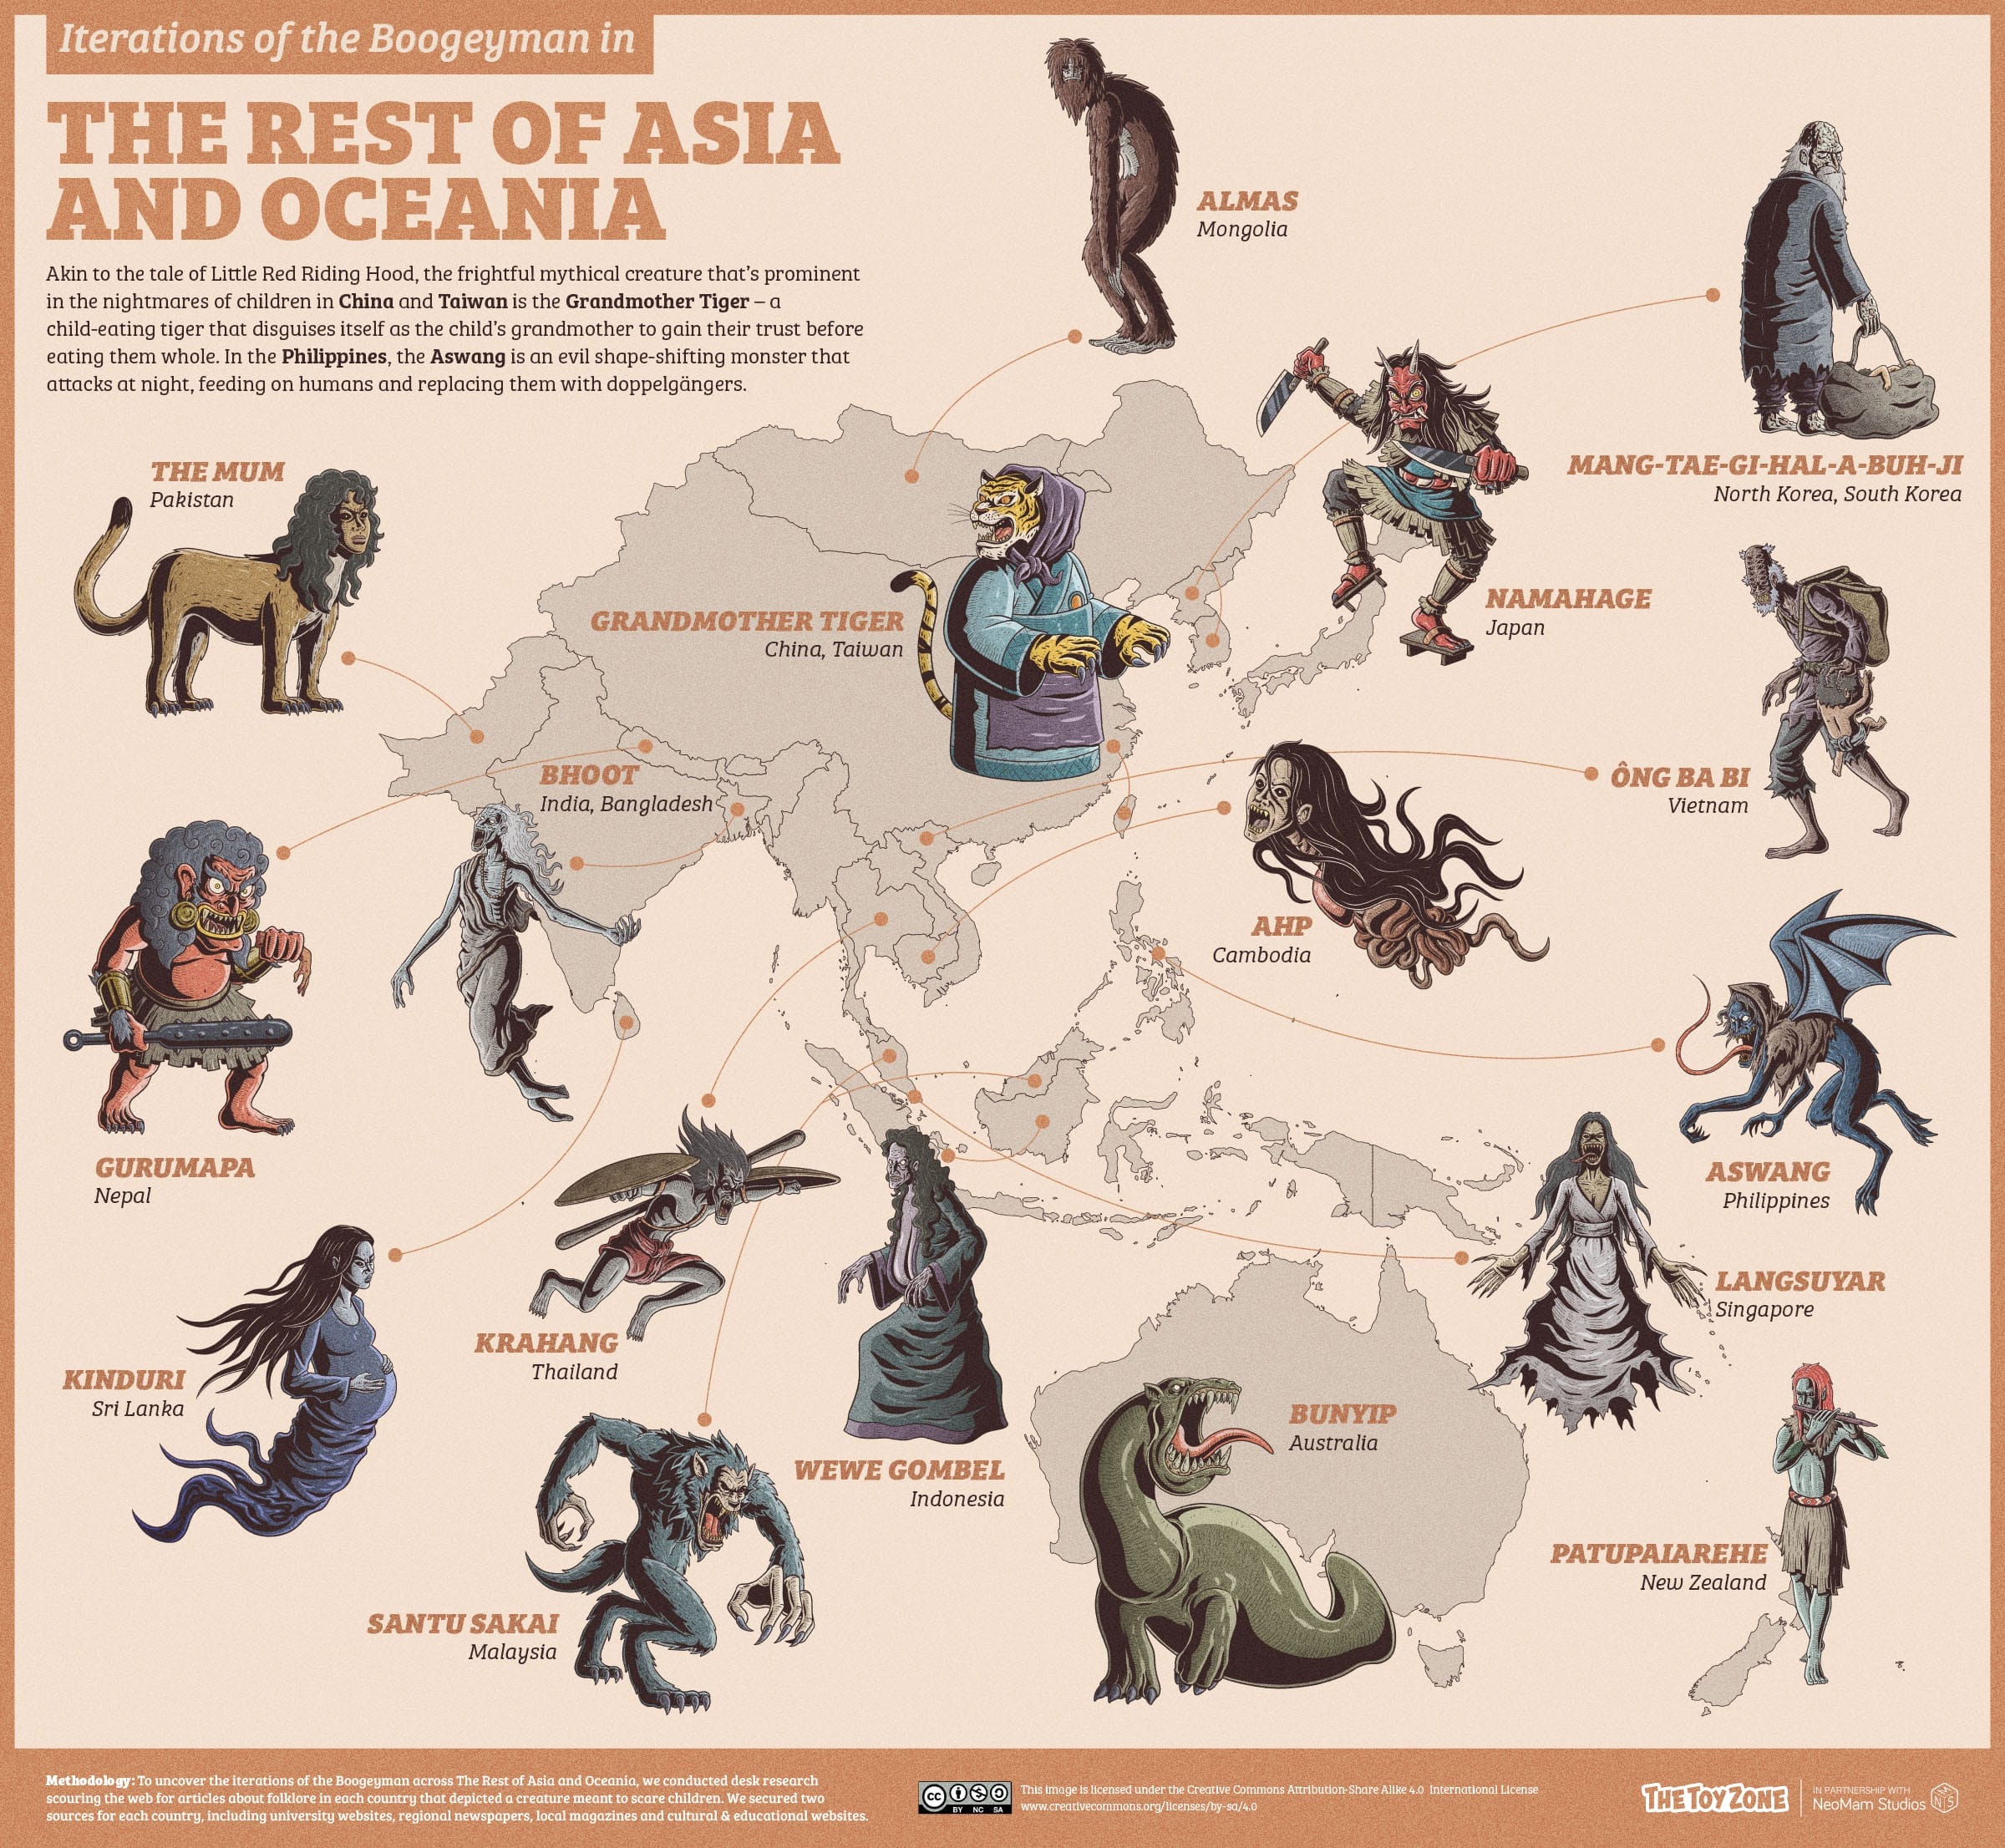 Folklore representations of the boogeyman in Rest of Asia